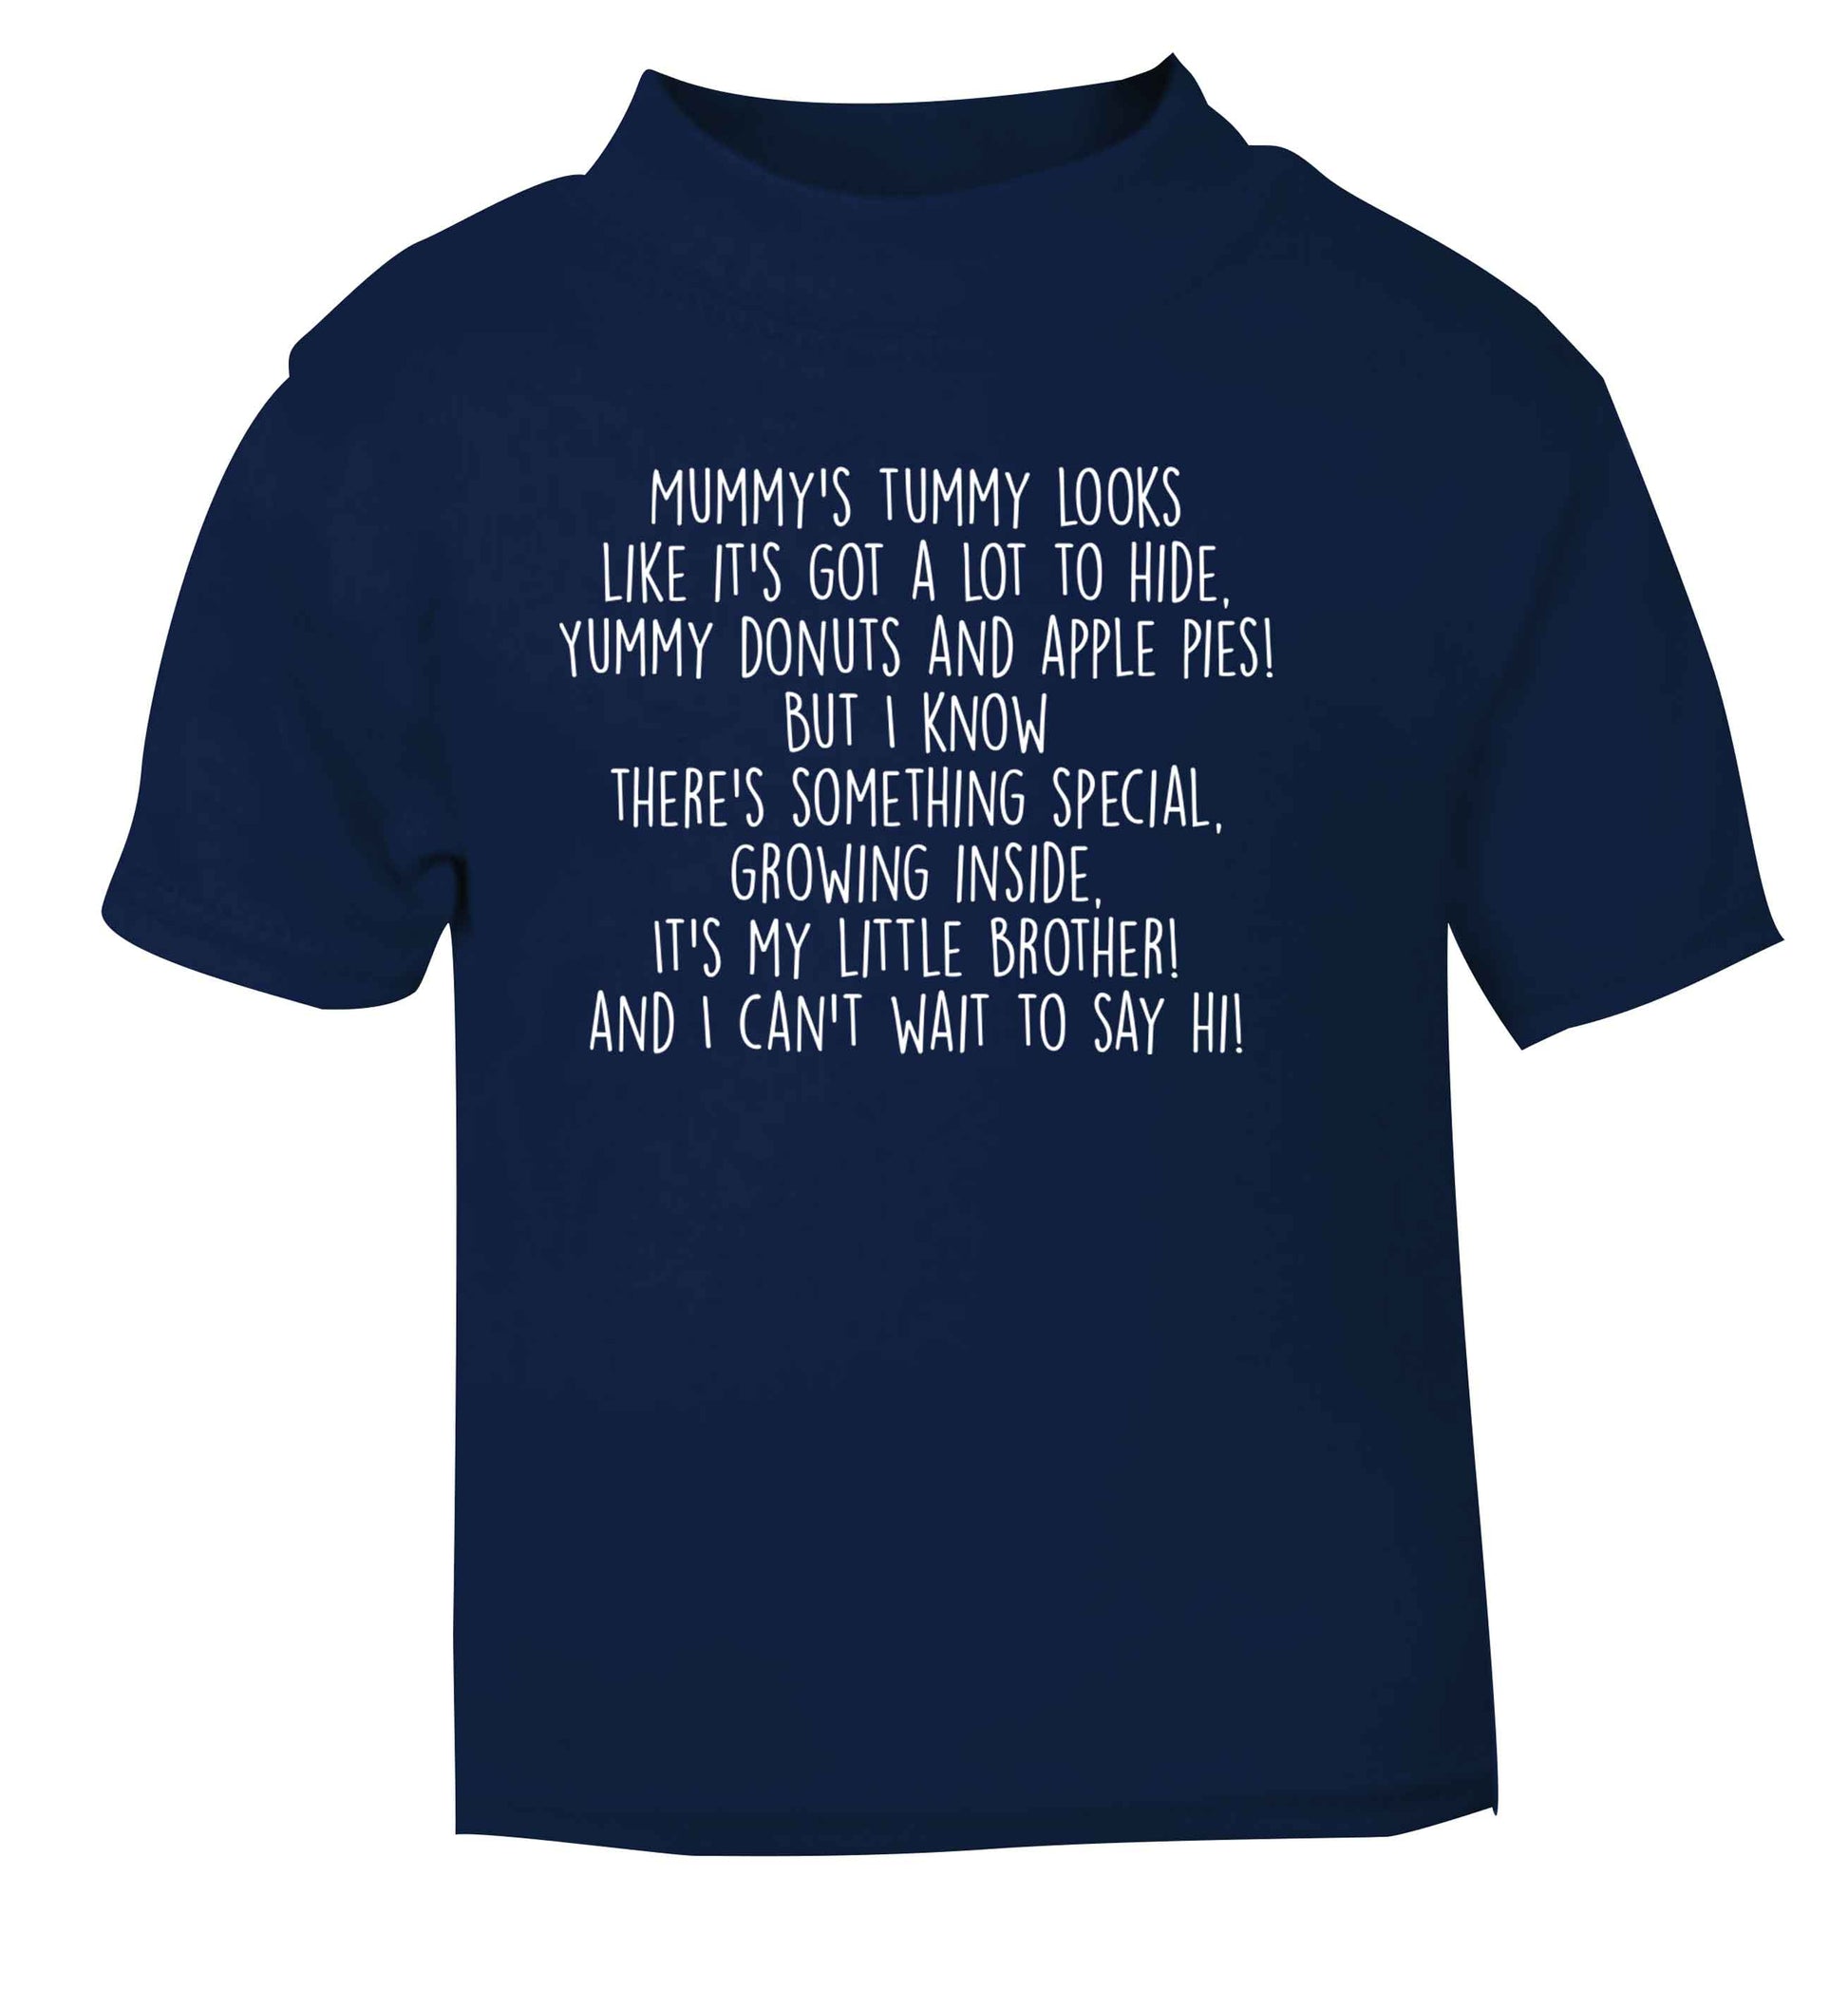 Something special growing inside it's my little brother I can't wait to say hi! navy Baby Toddler Tshirt 2 Years